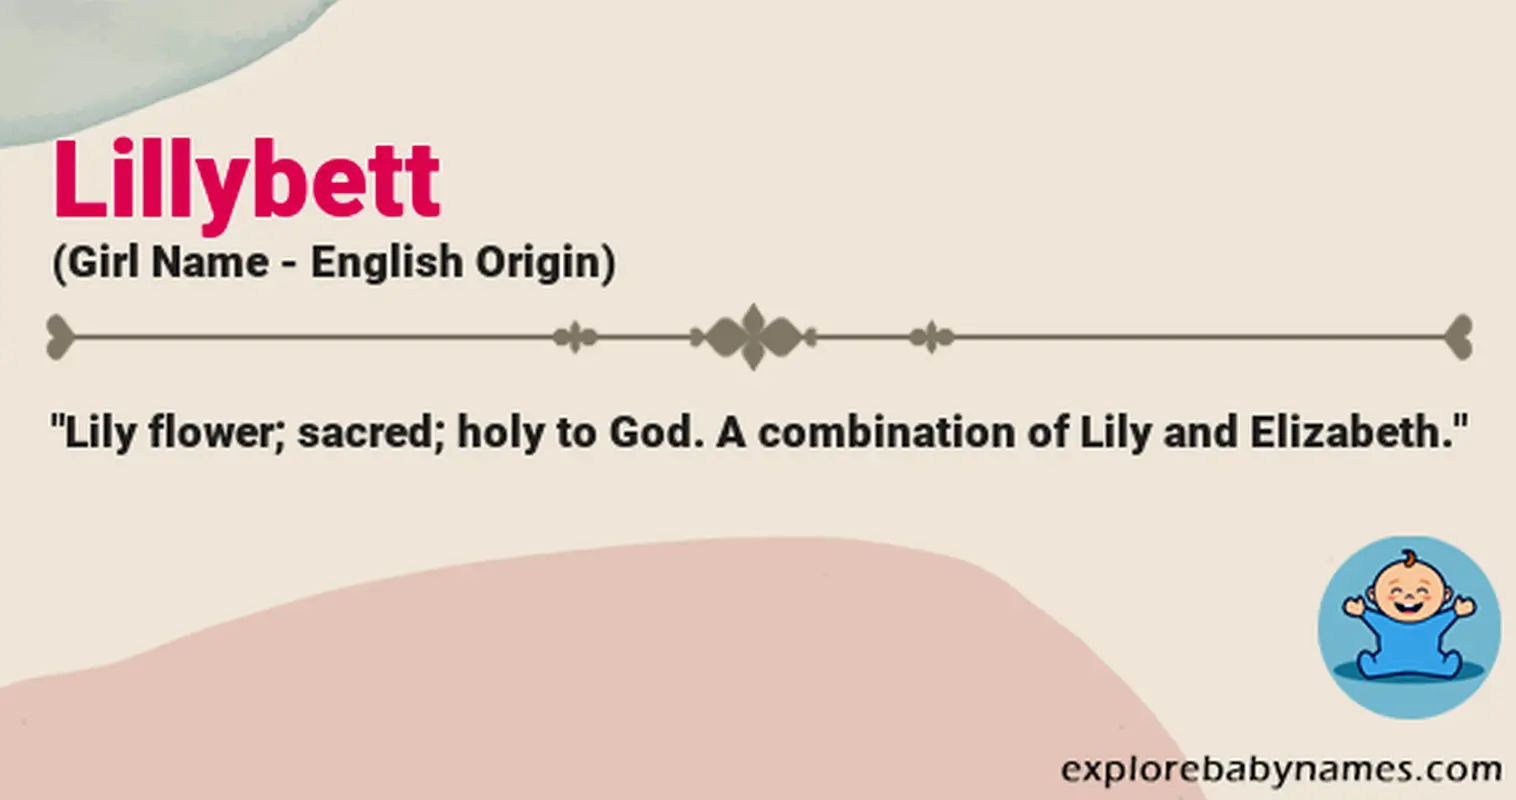 Meaning of Lillybett